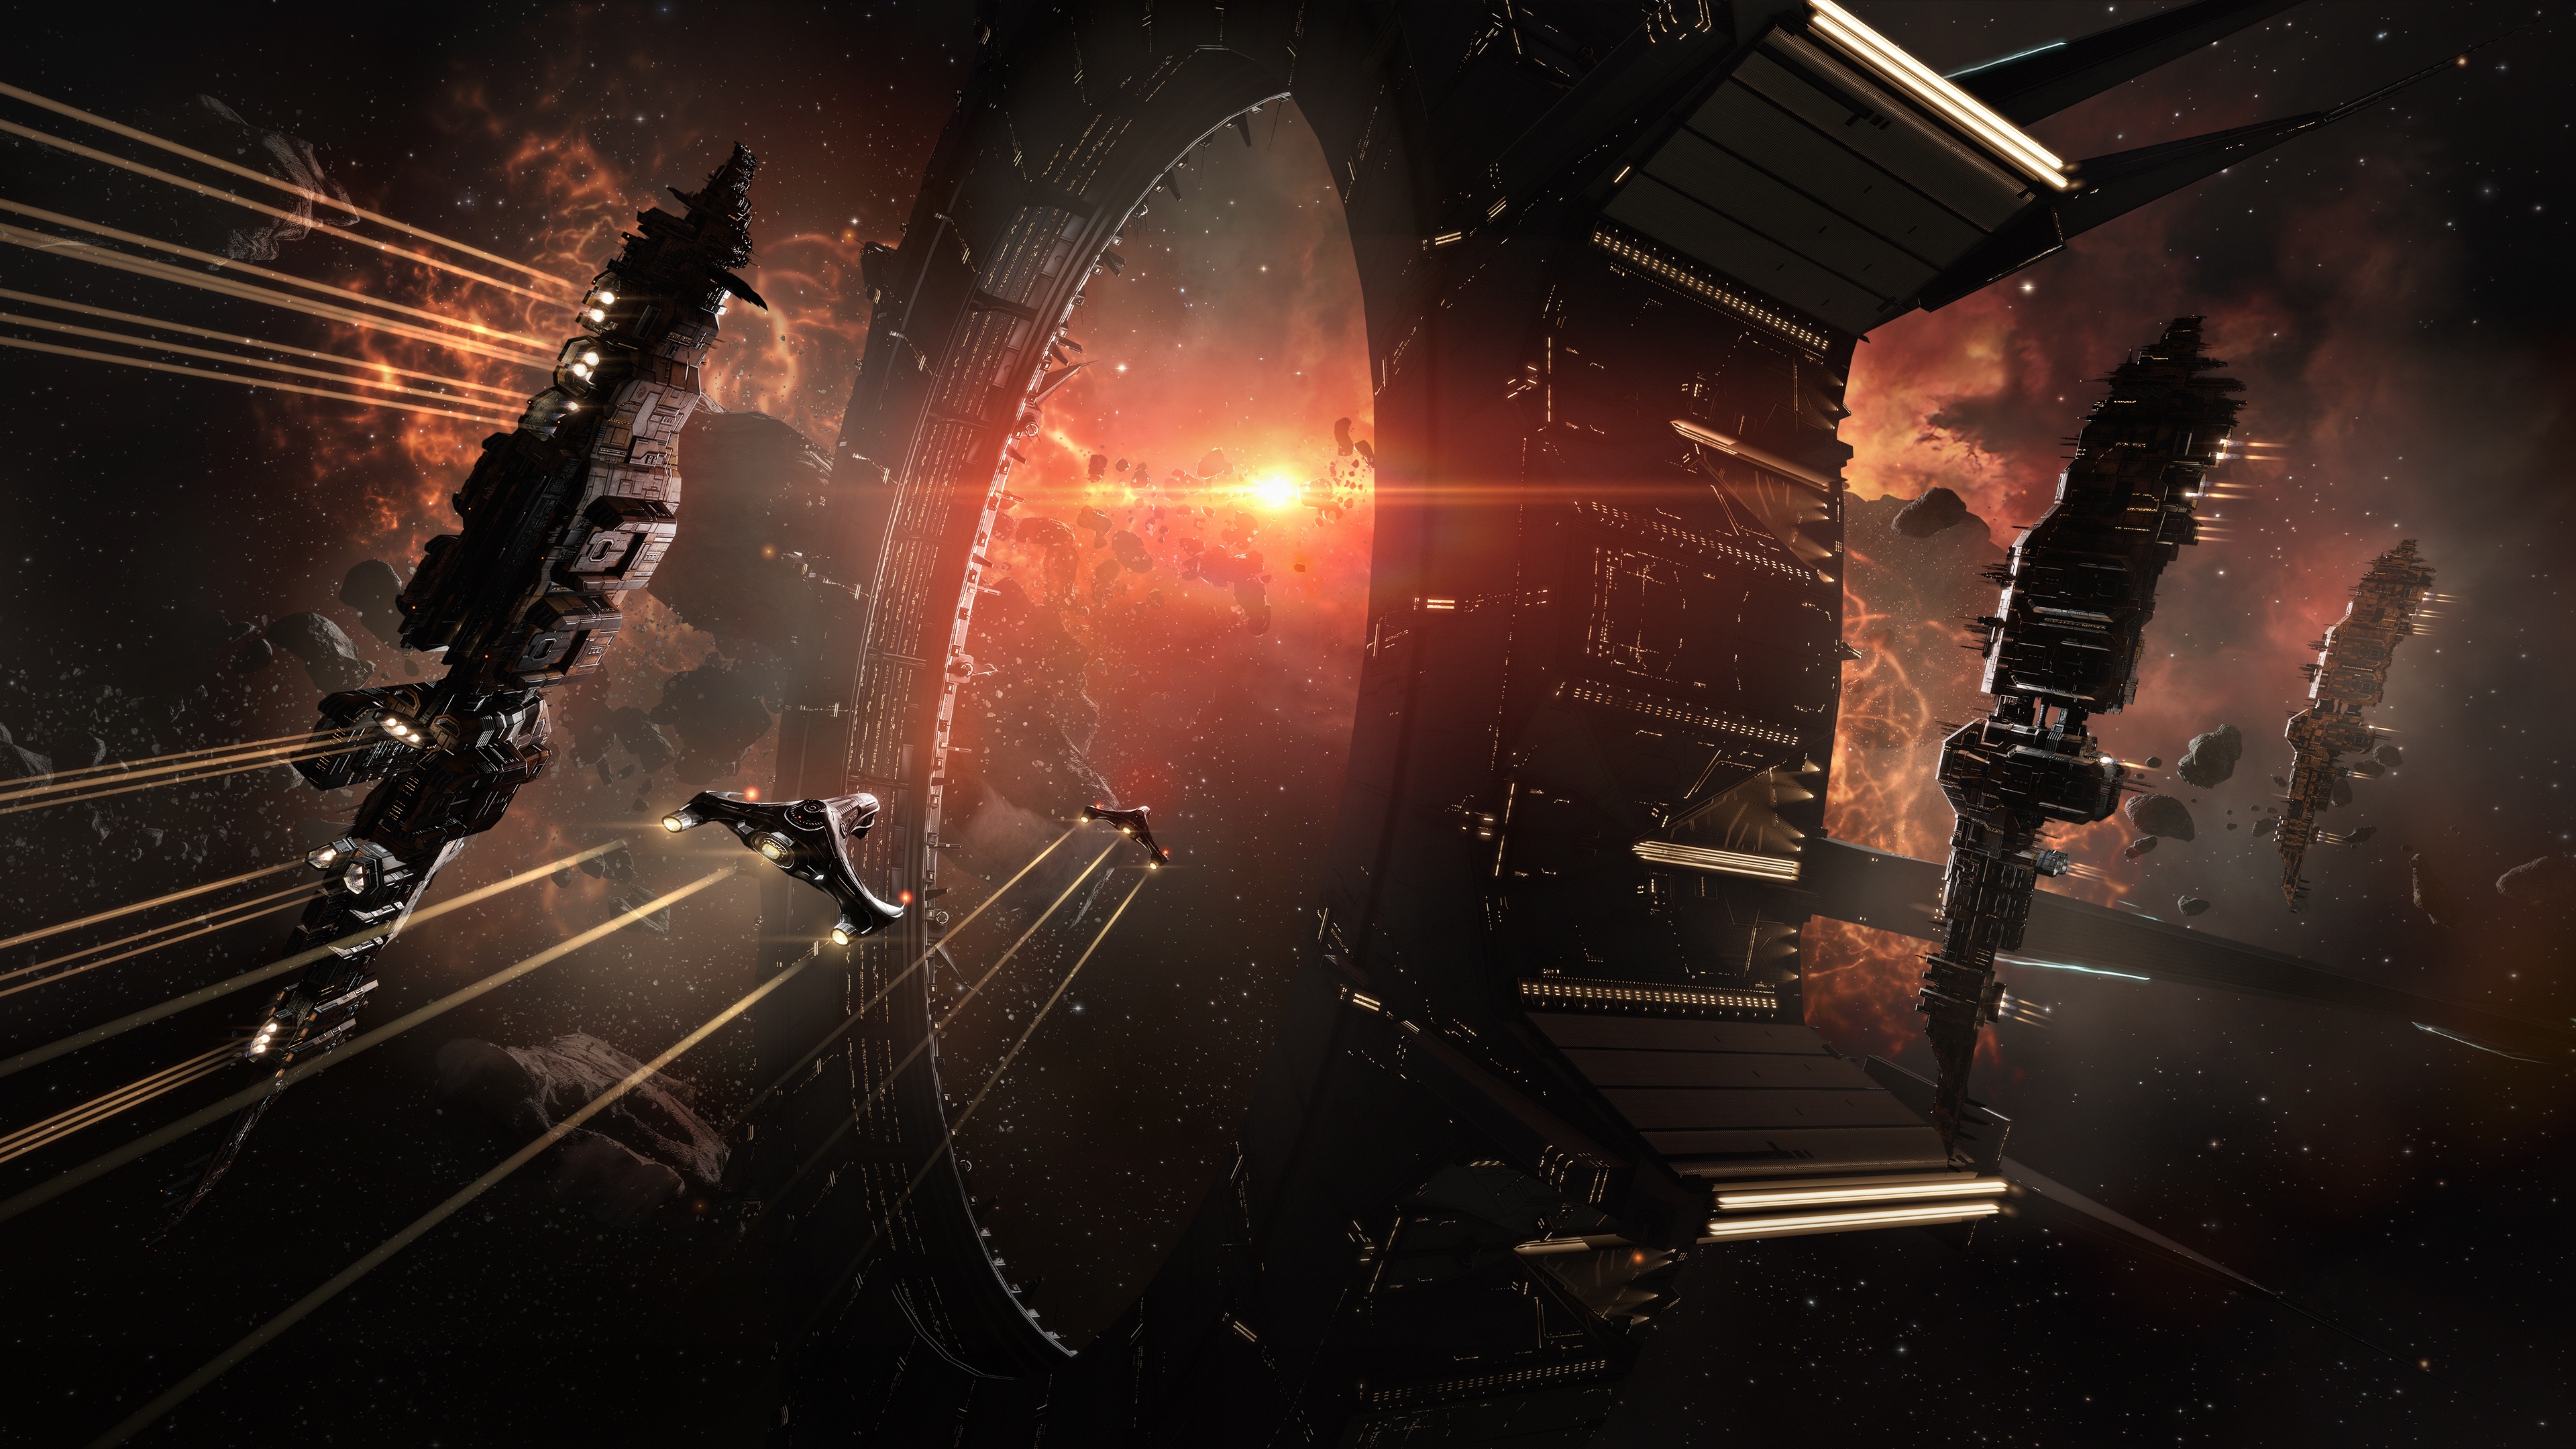 EVE Online Spaceship Galaxy Science Fiction Video Games Stars Video Game Art 3840x2160